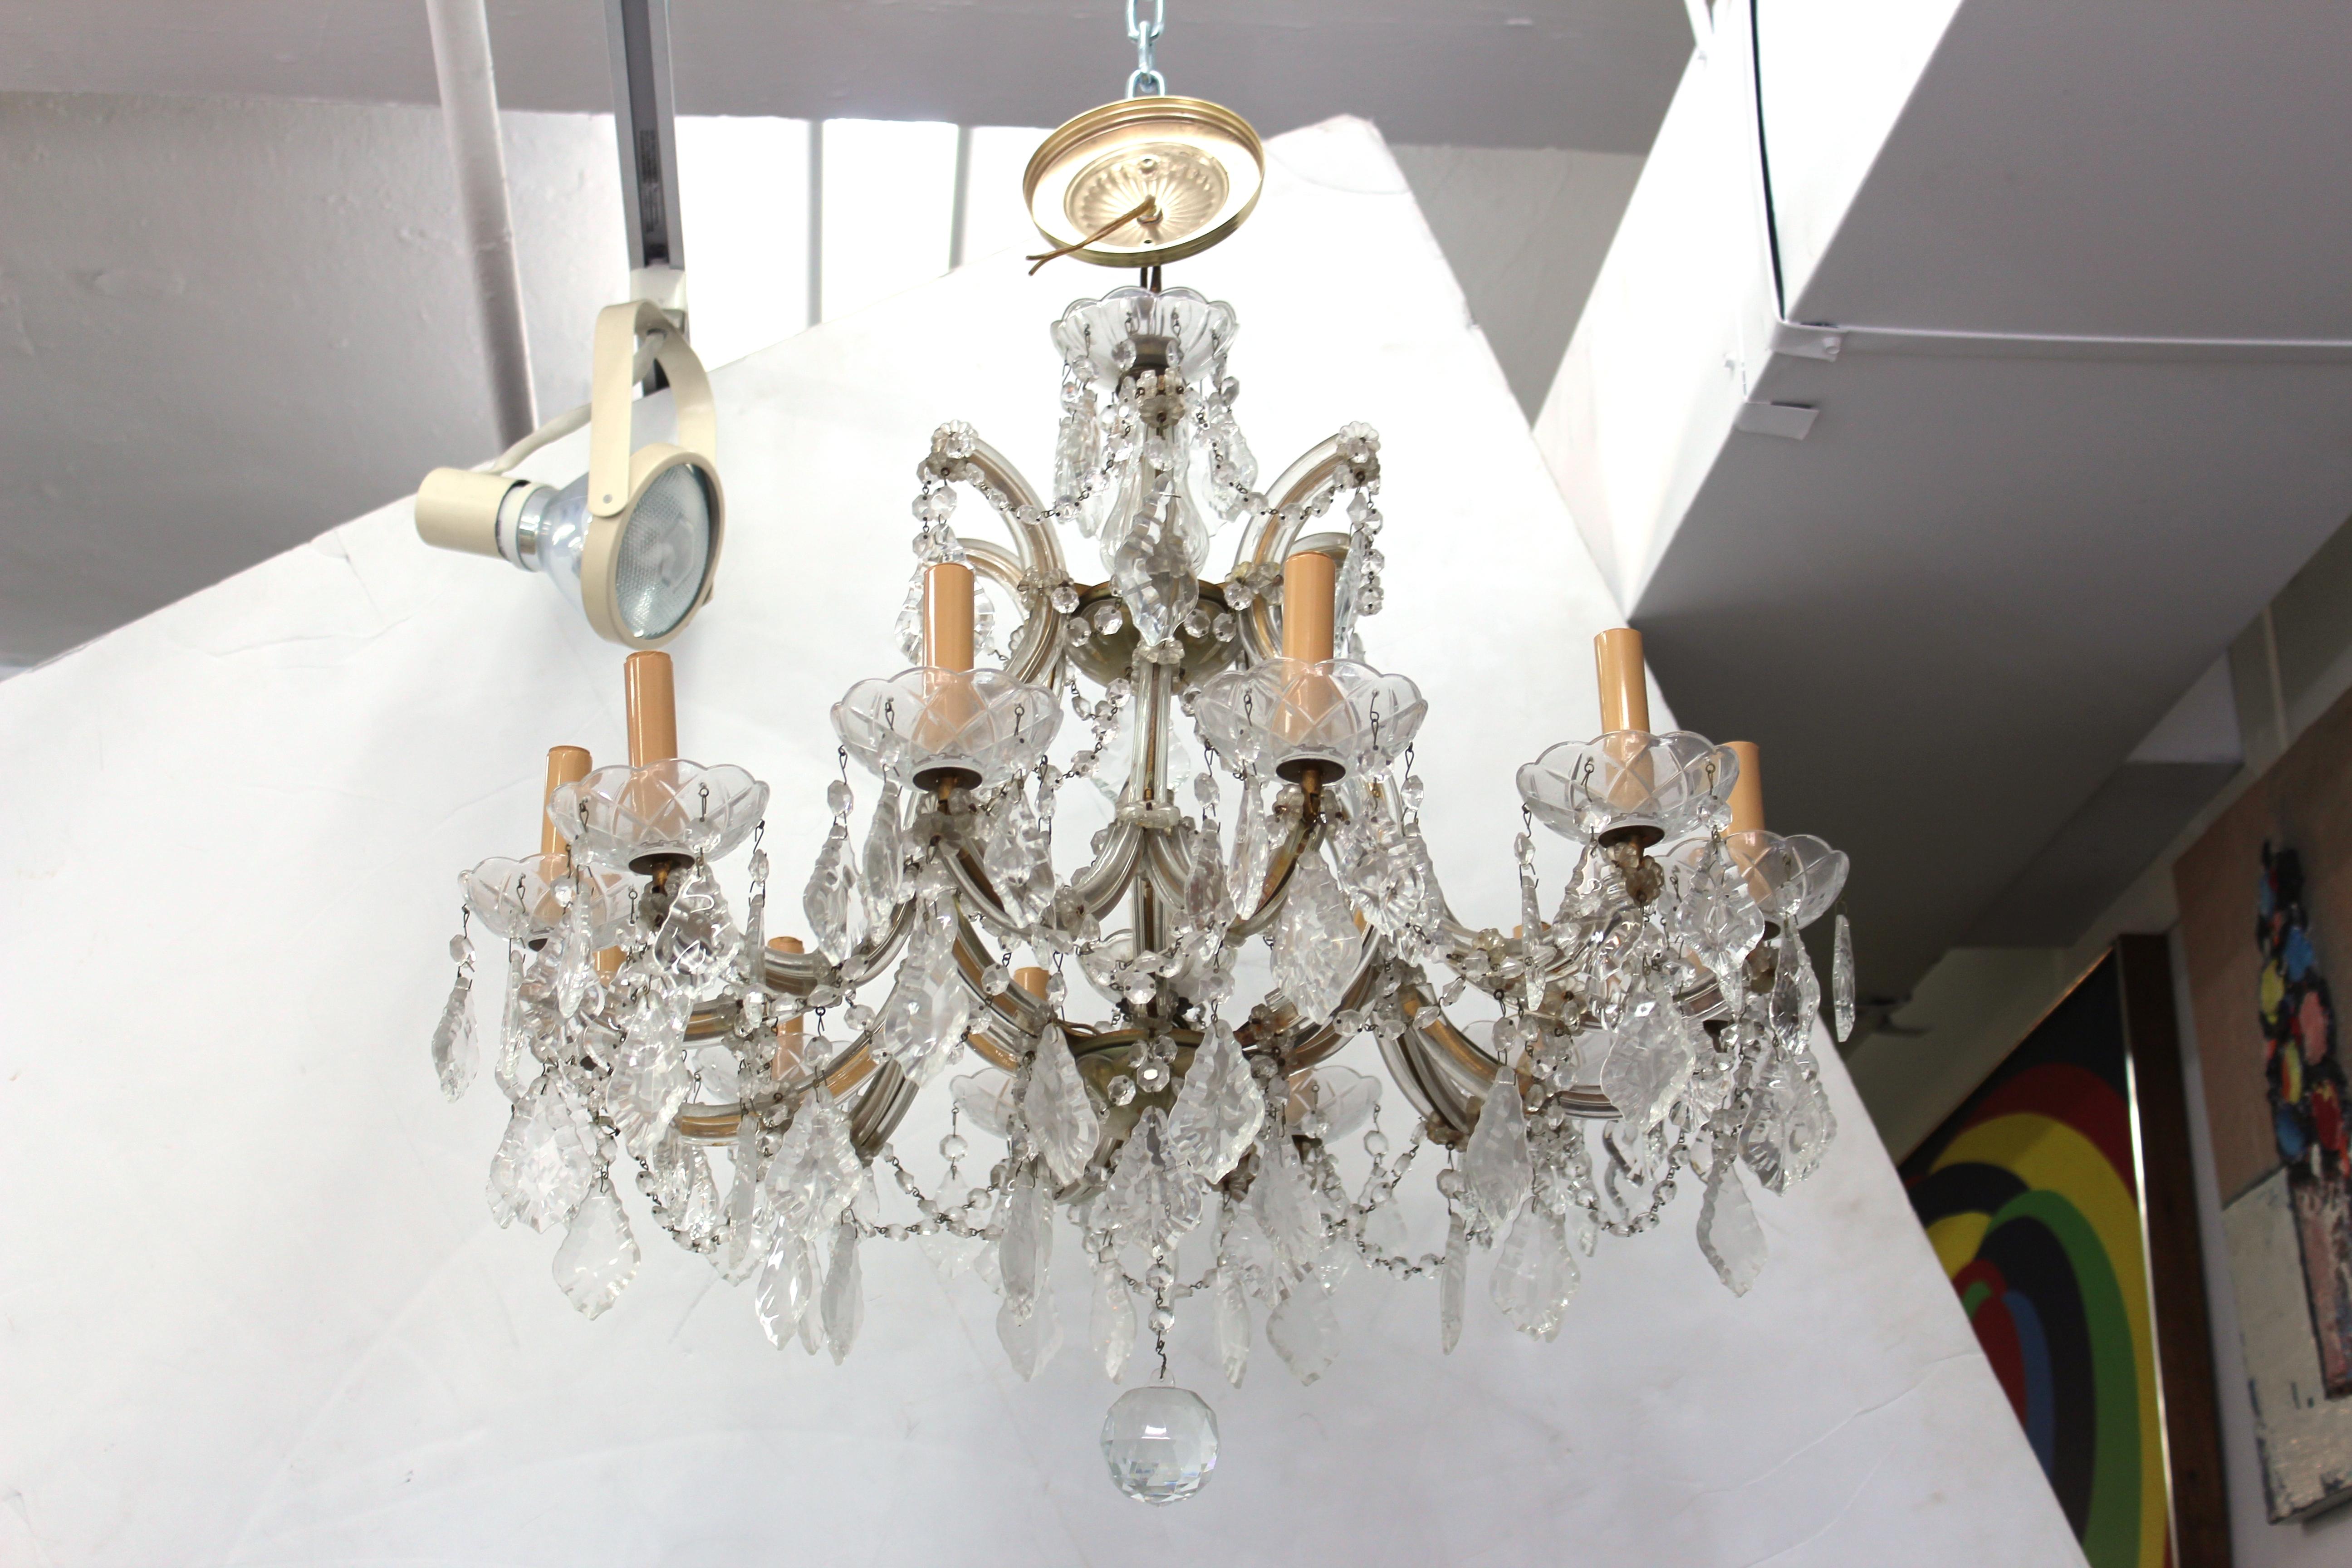 Chandelier with 12 arms in clear cut-glass and crystal. Each arm features a faux candle socket and is draped with cut crystal beads. Large cut crystal drop hang throughout. Some wear includes missing droplets on lower tear appropriate to age and